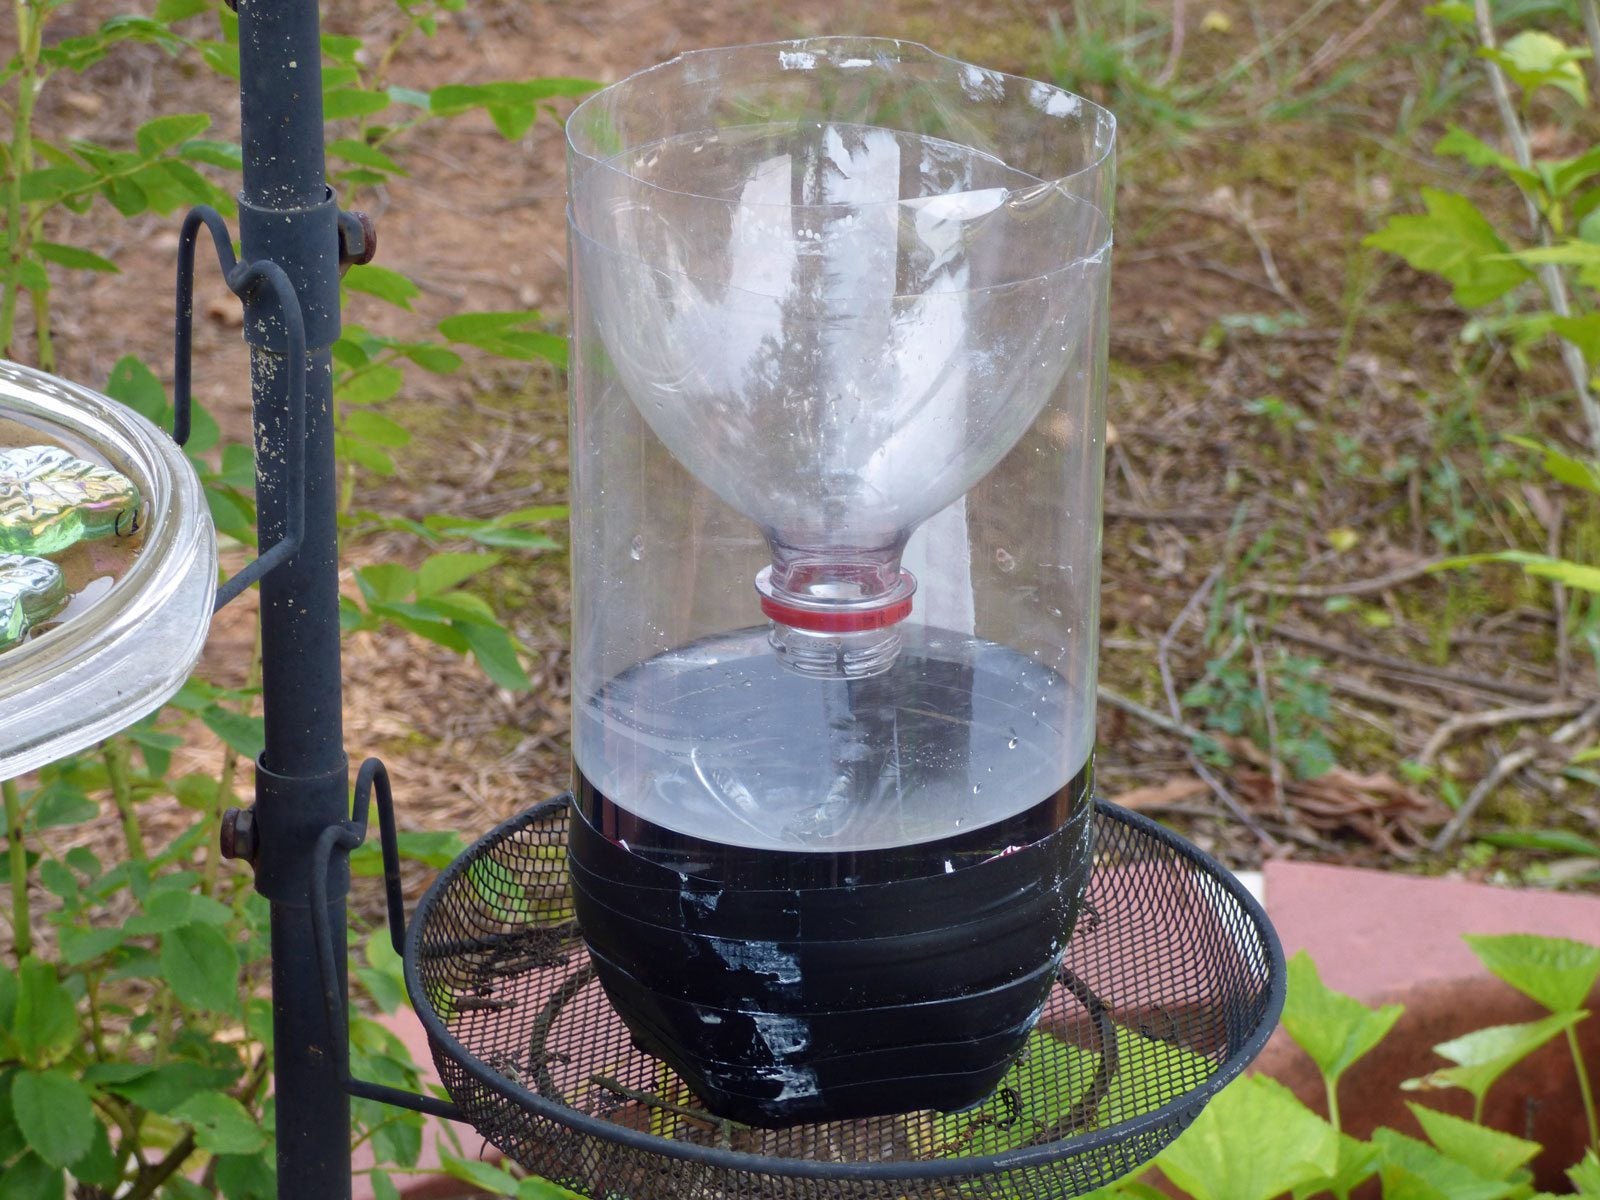 How to Make a Fly Trap From an Empty Soda Bottle